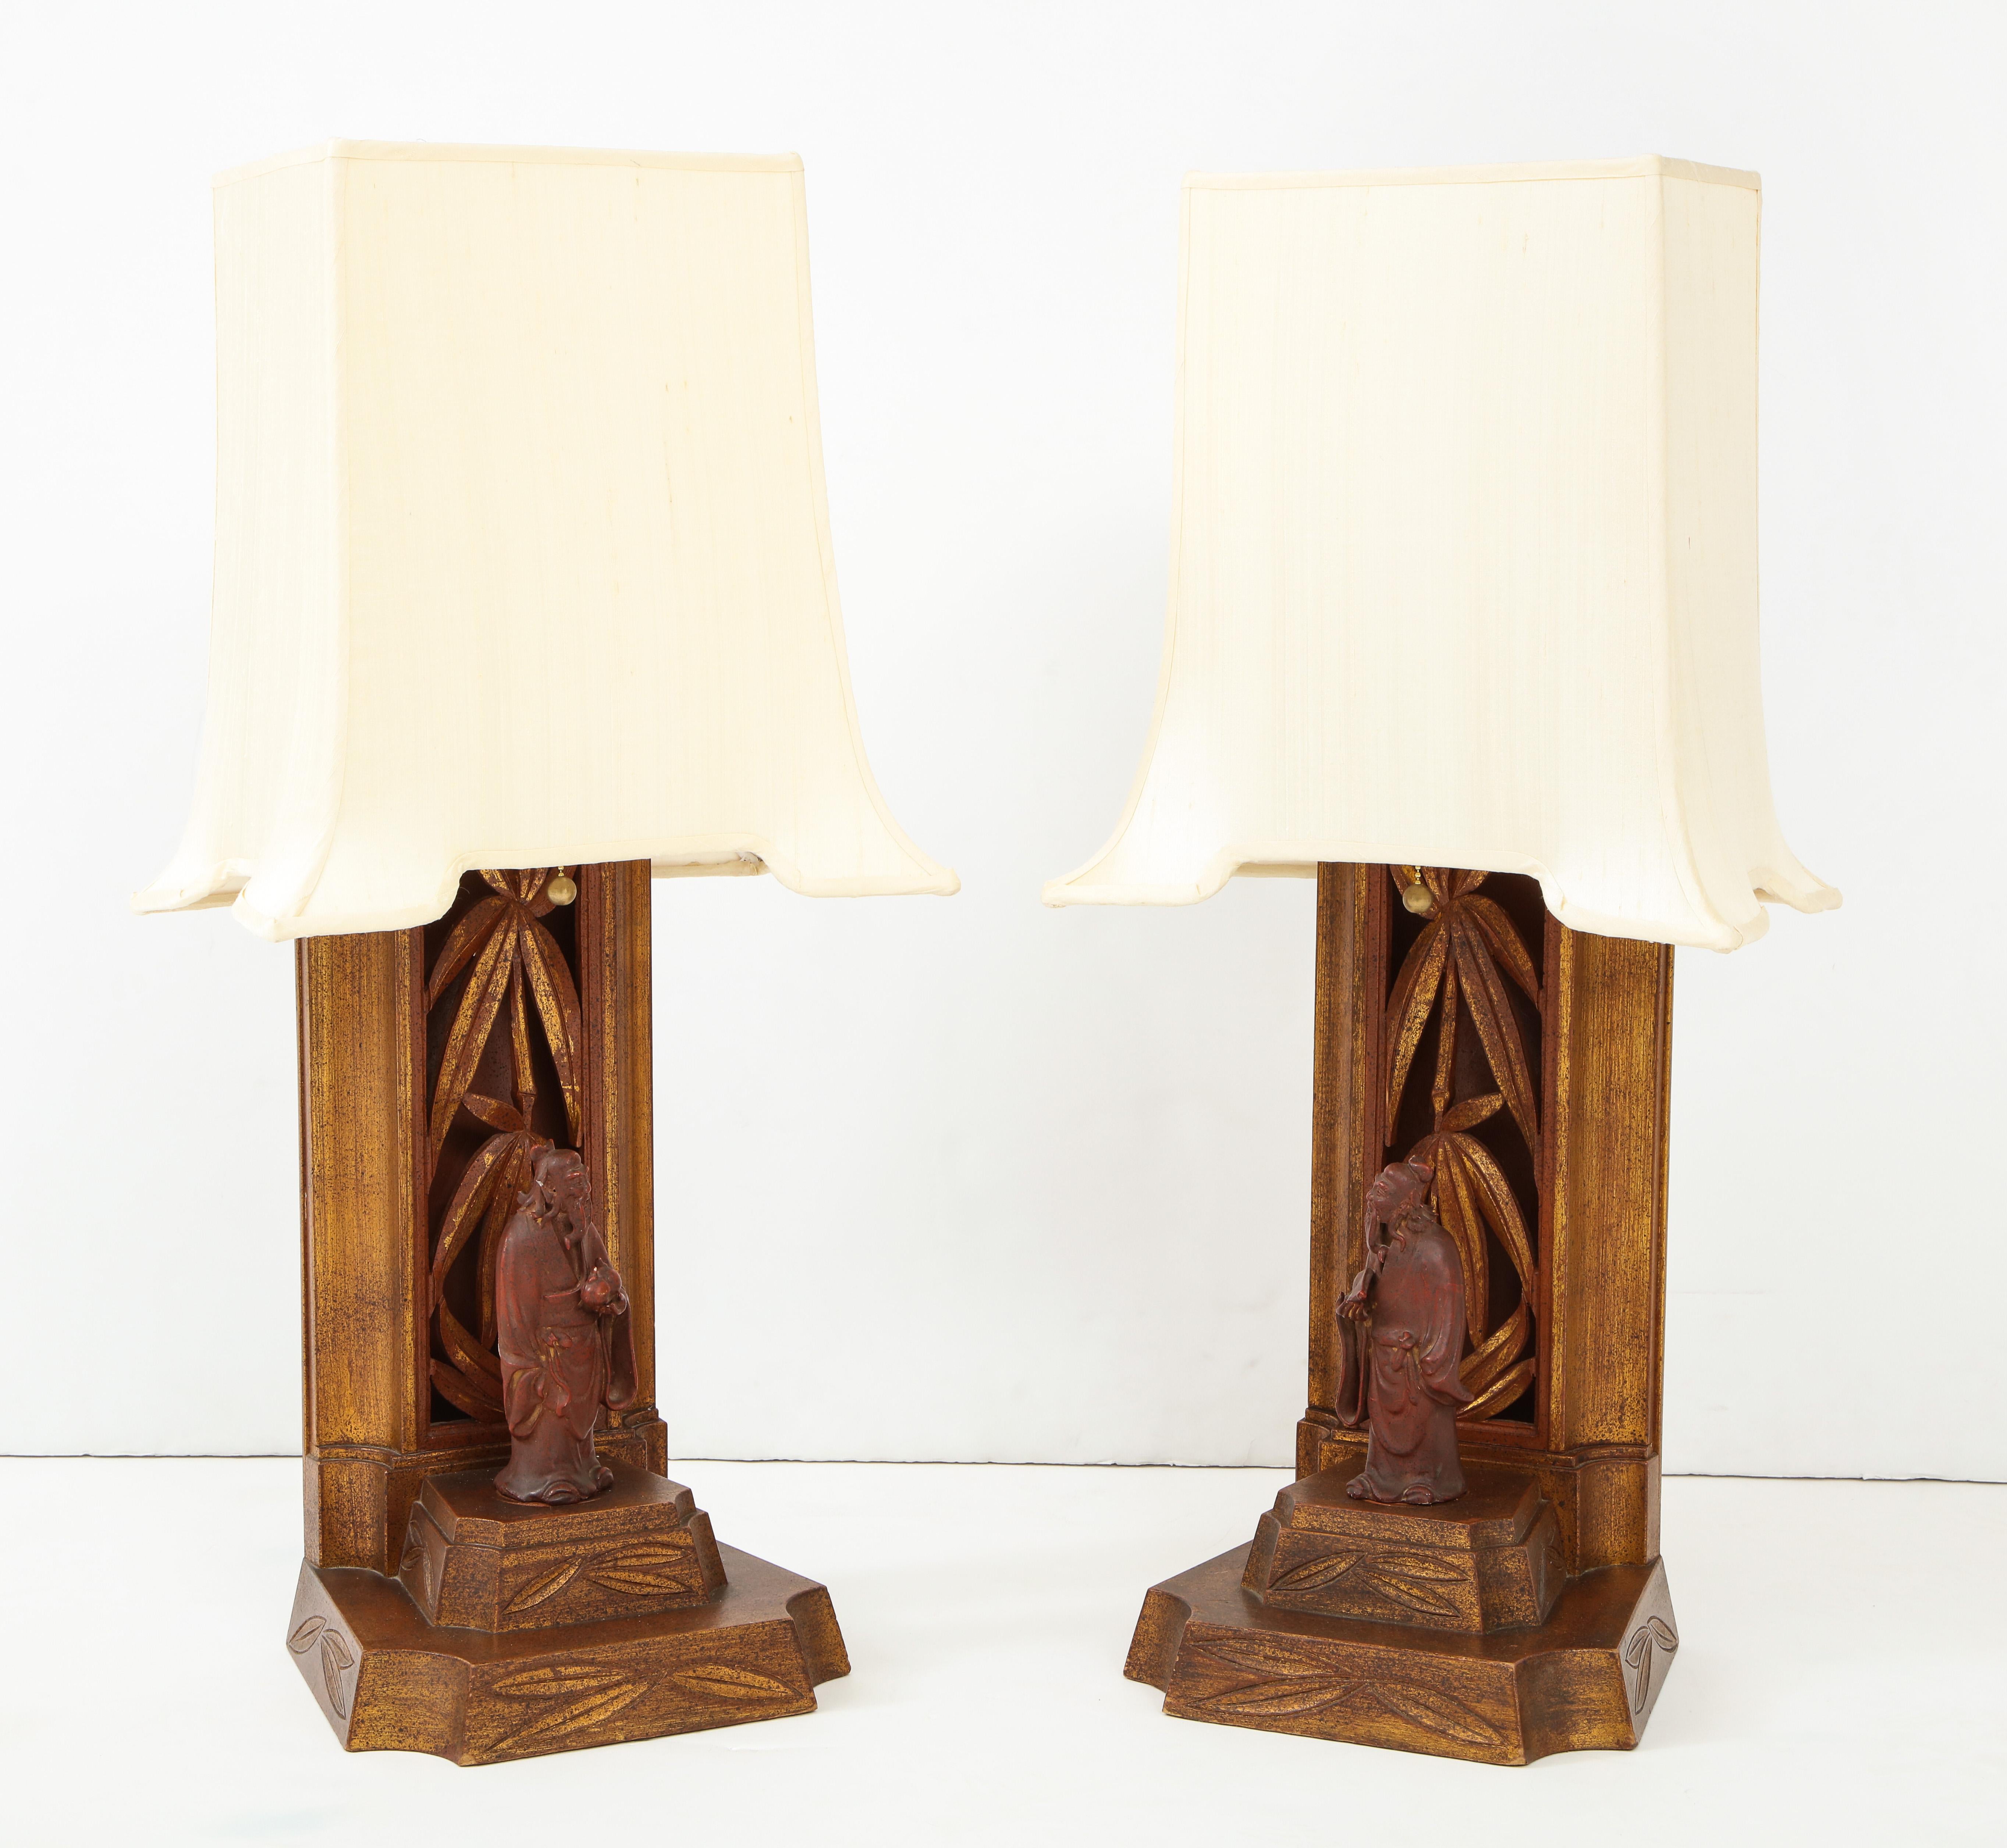 Wonderful pair of 1950s hand carved Chinese figurine lamps by
James Mont.
The cinnabar lamp bases and figurines are decorated with gold leaf.
The lamps have been newly rewired and come with the original pagoda shades which have also been newly